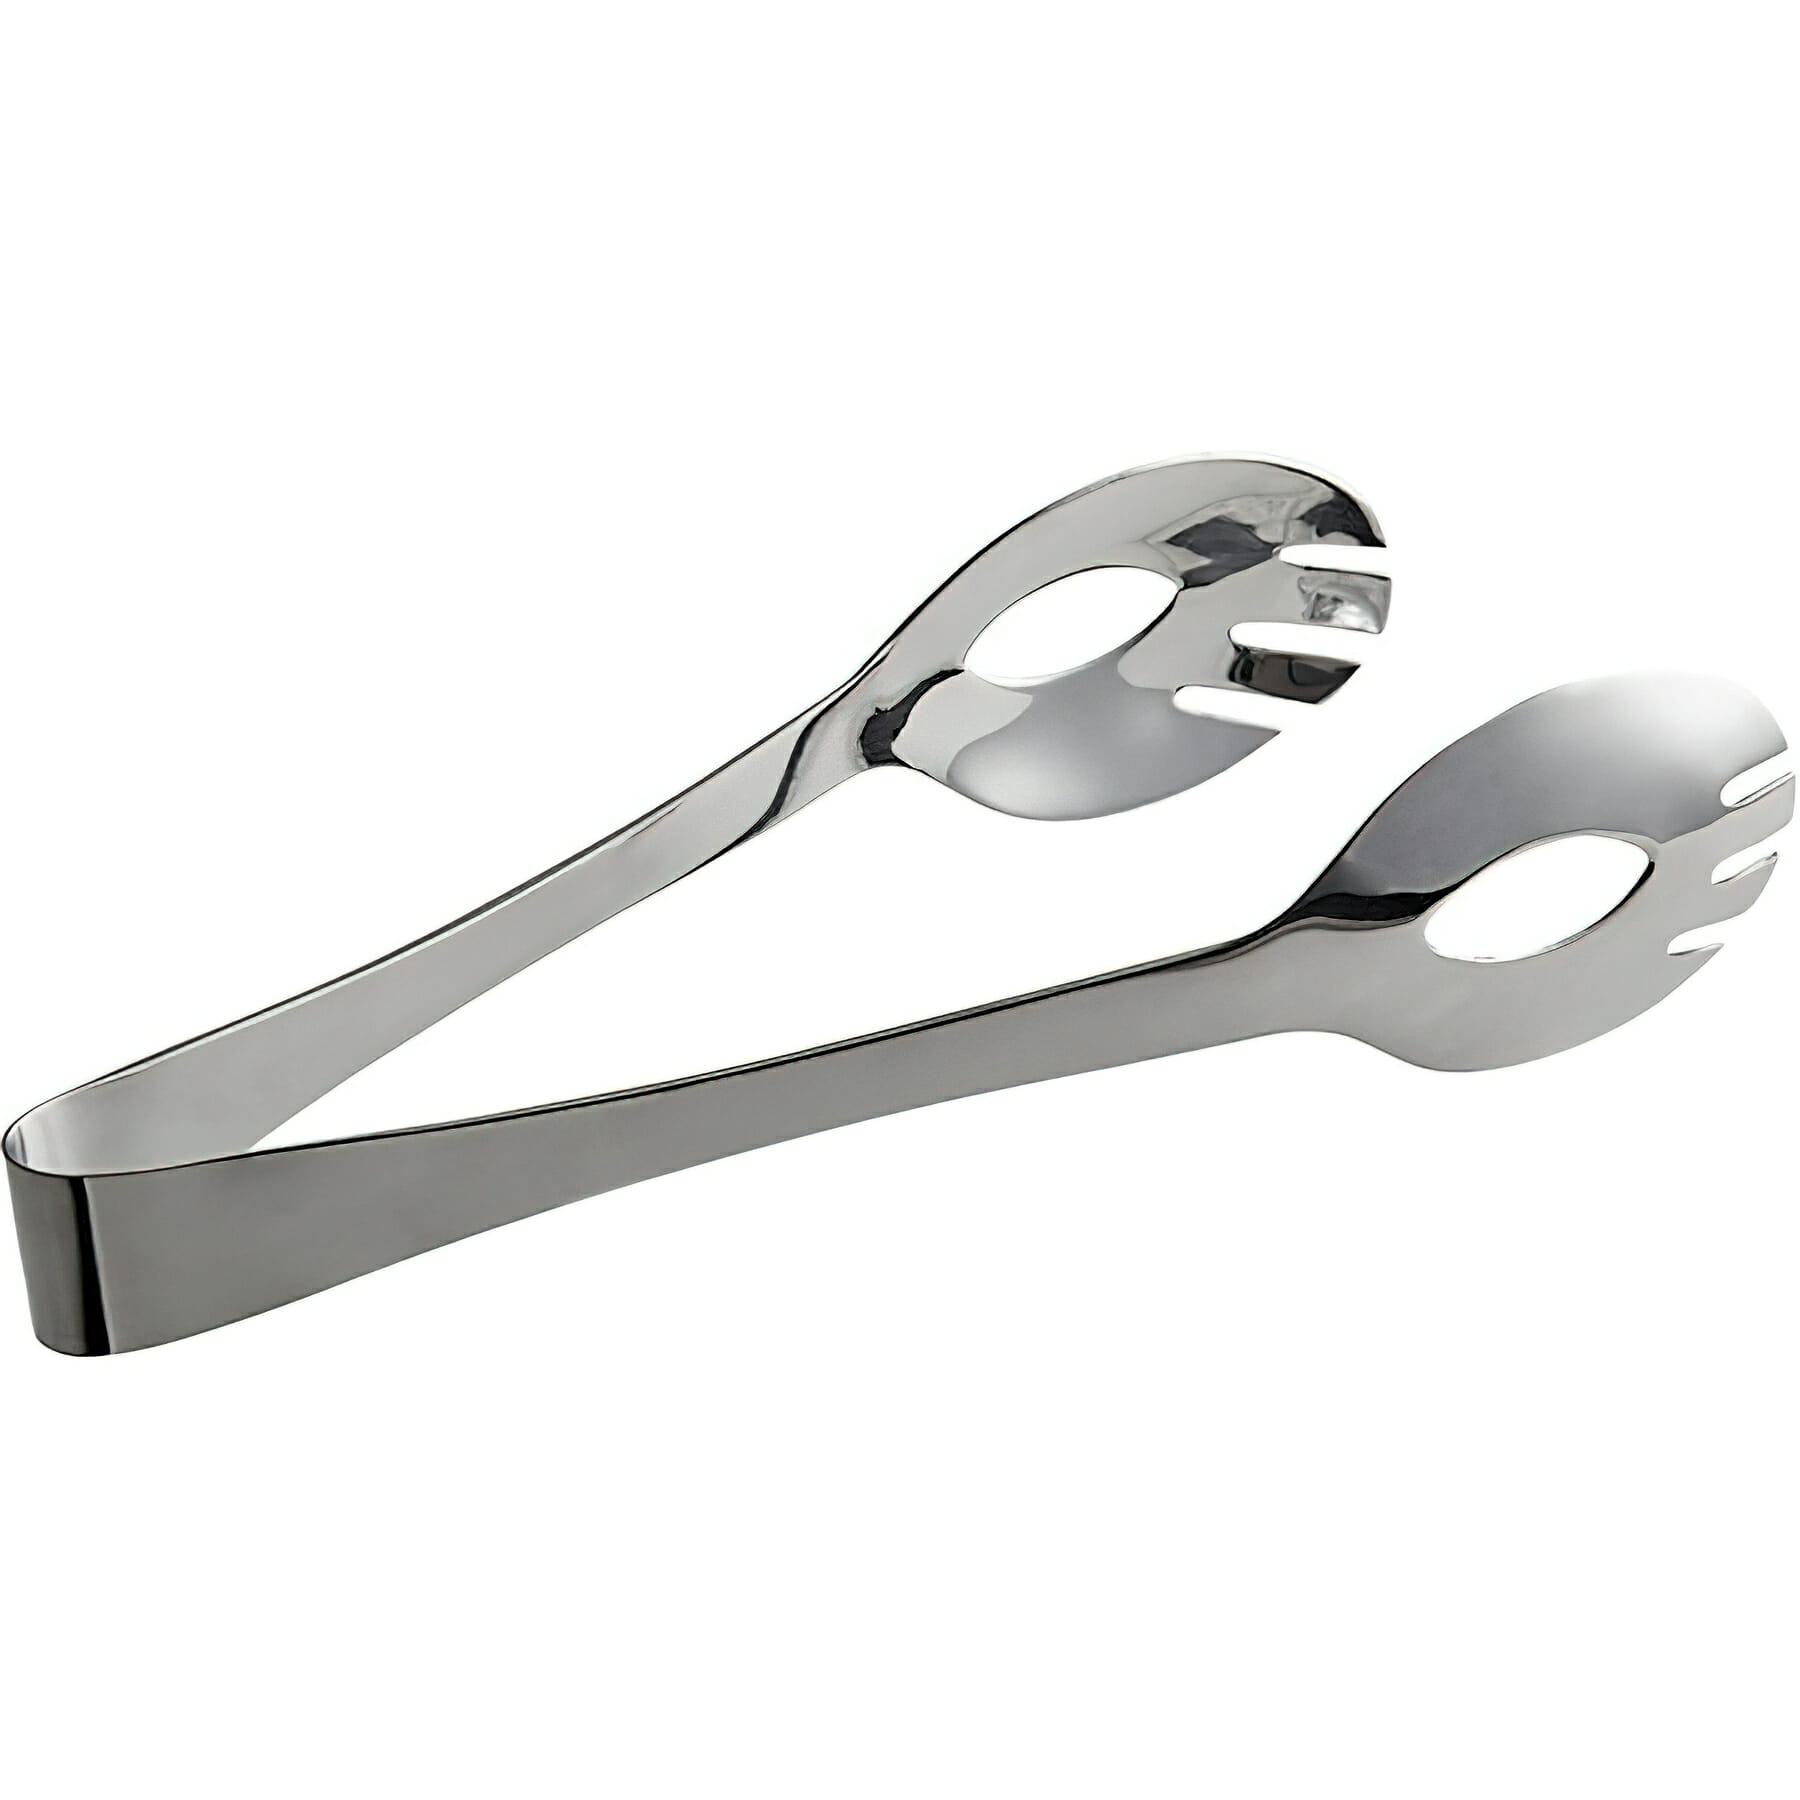 9.5" Stainless Steel Tongs w/ Mirror Finish